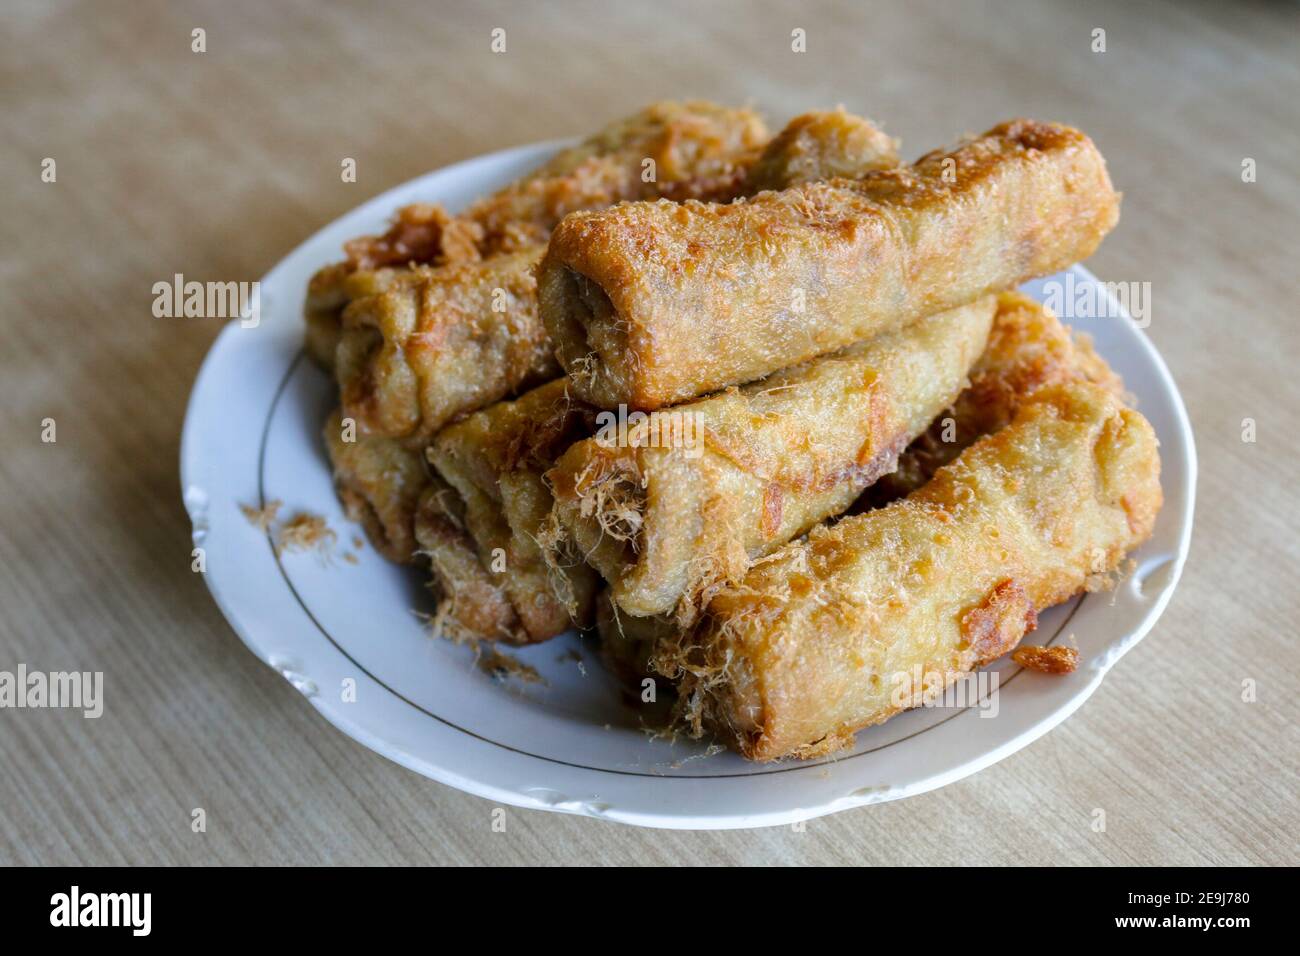 Fried spring rolls or popia or lumpia in white plate Stock Photo